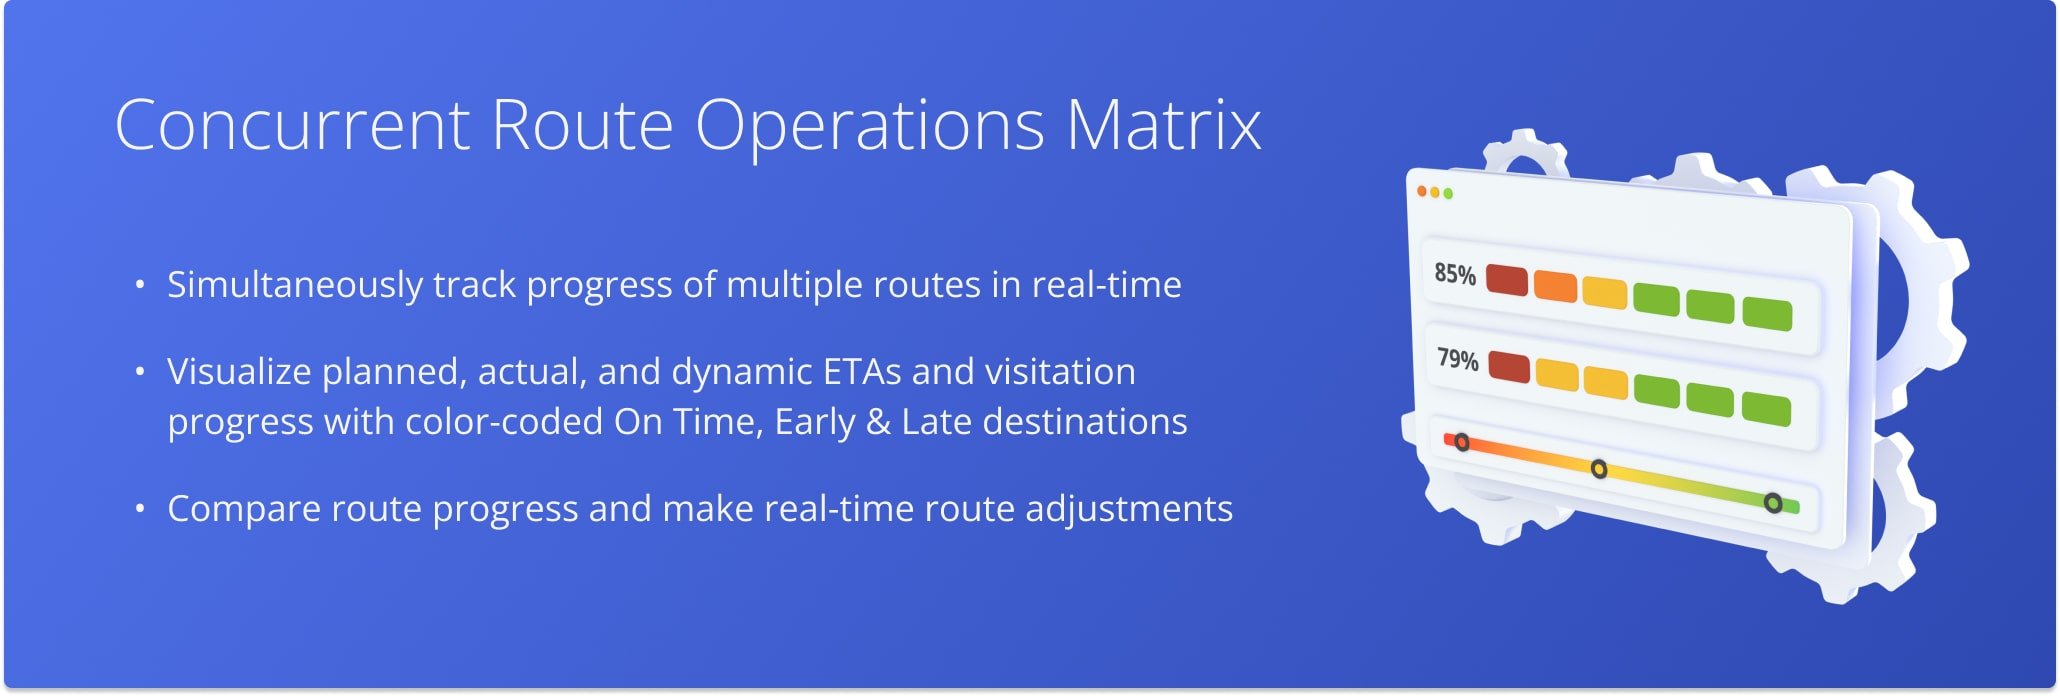 Route4Me Operations Matrix, near real-time route tracking, stop details and schedule tracking, color-coded stop status and schedule tracking.